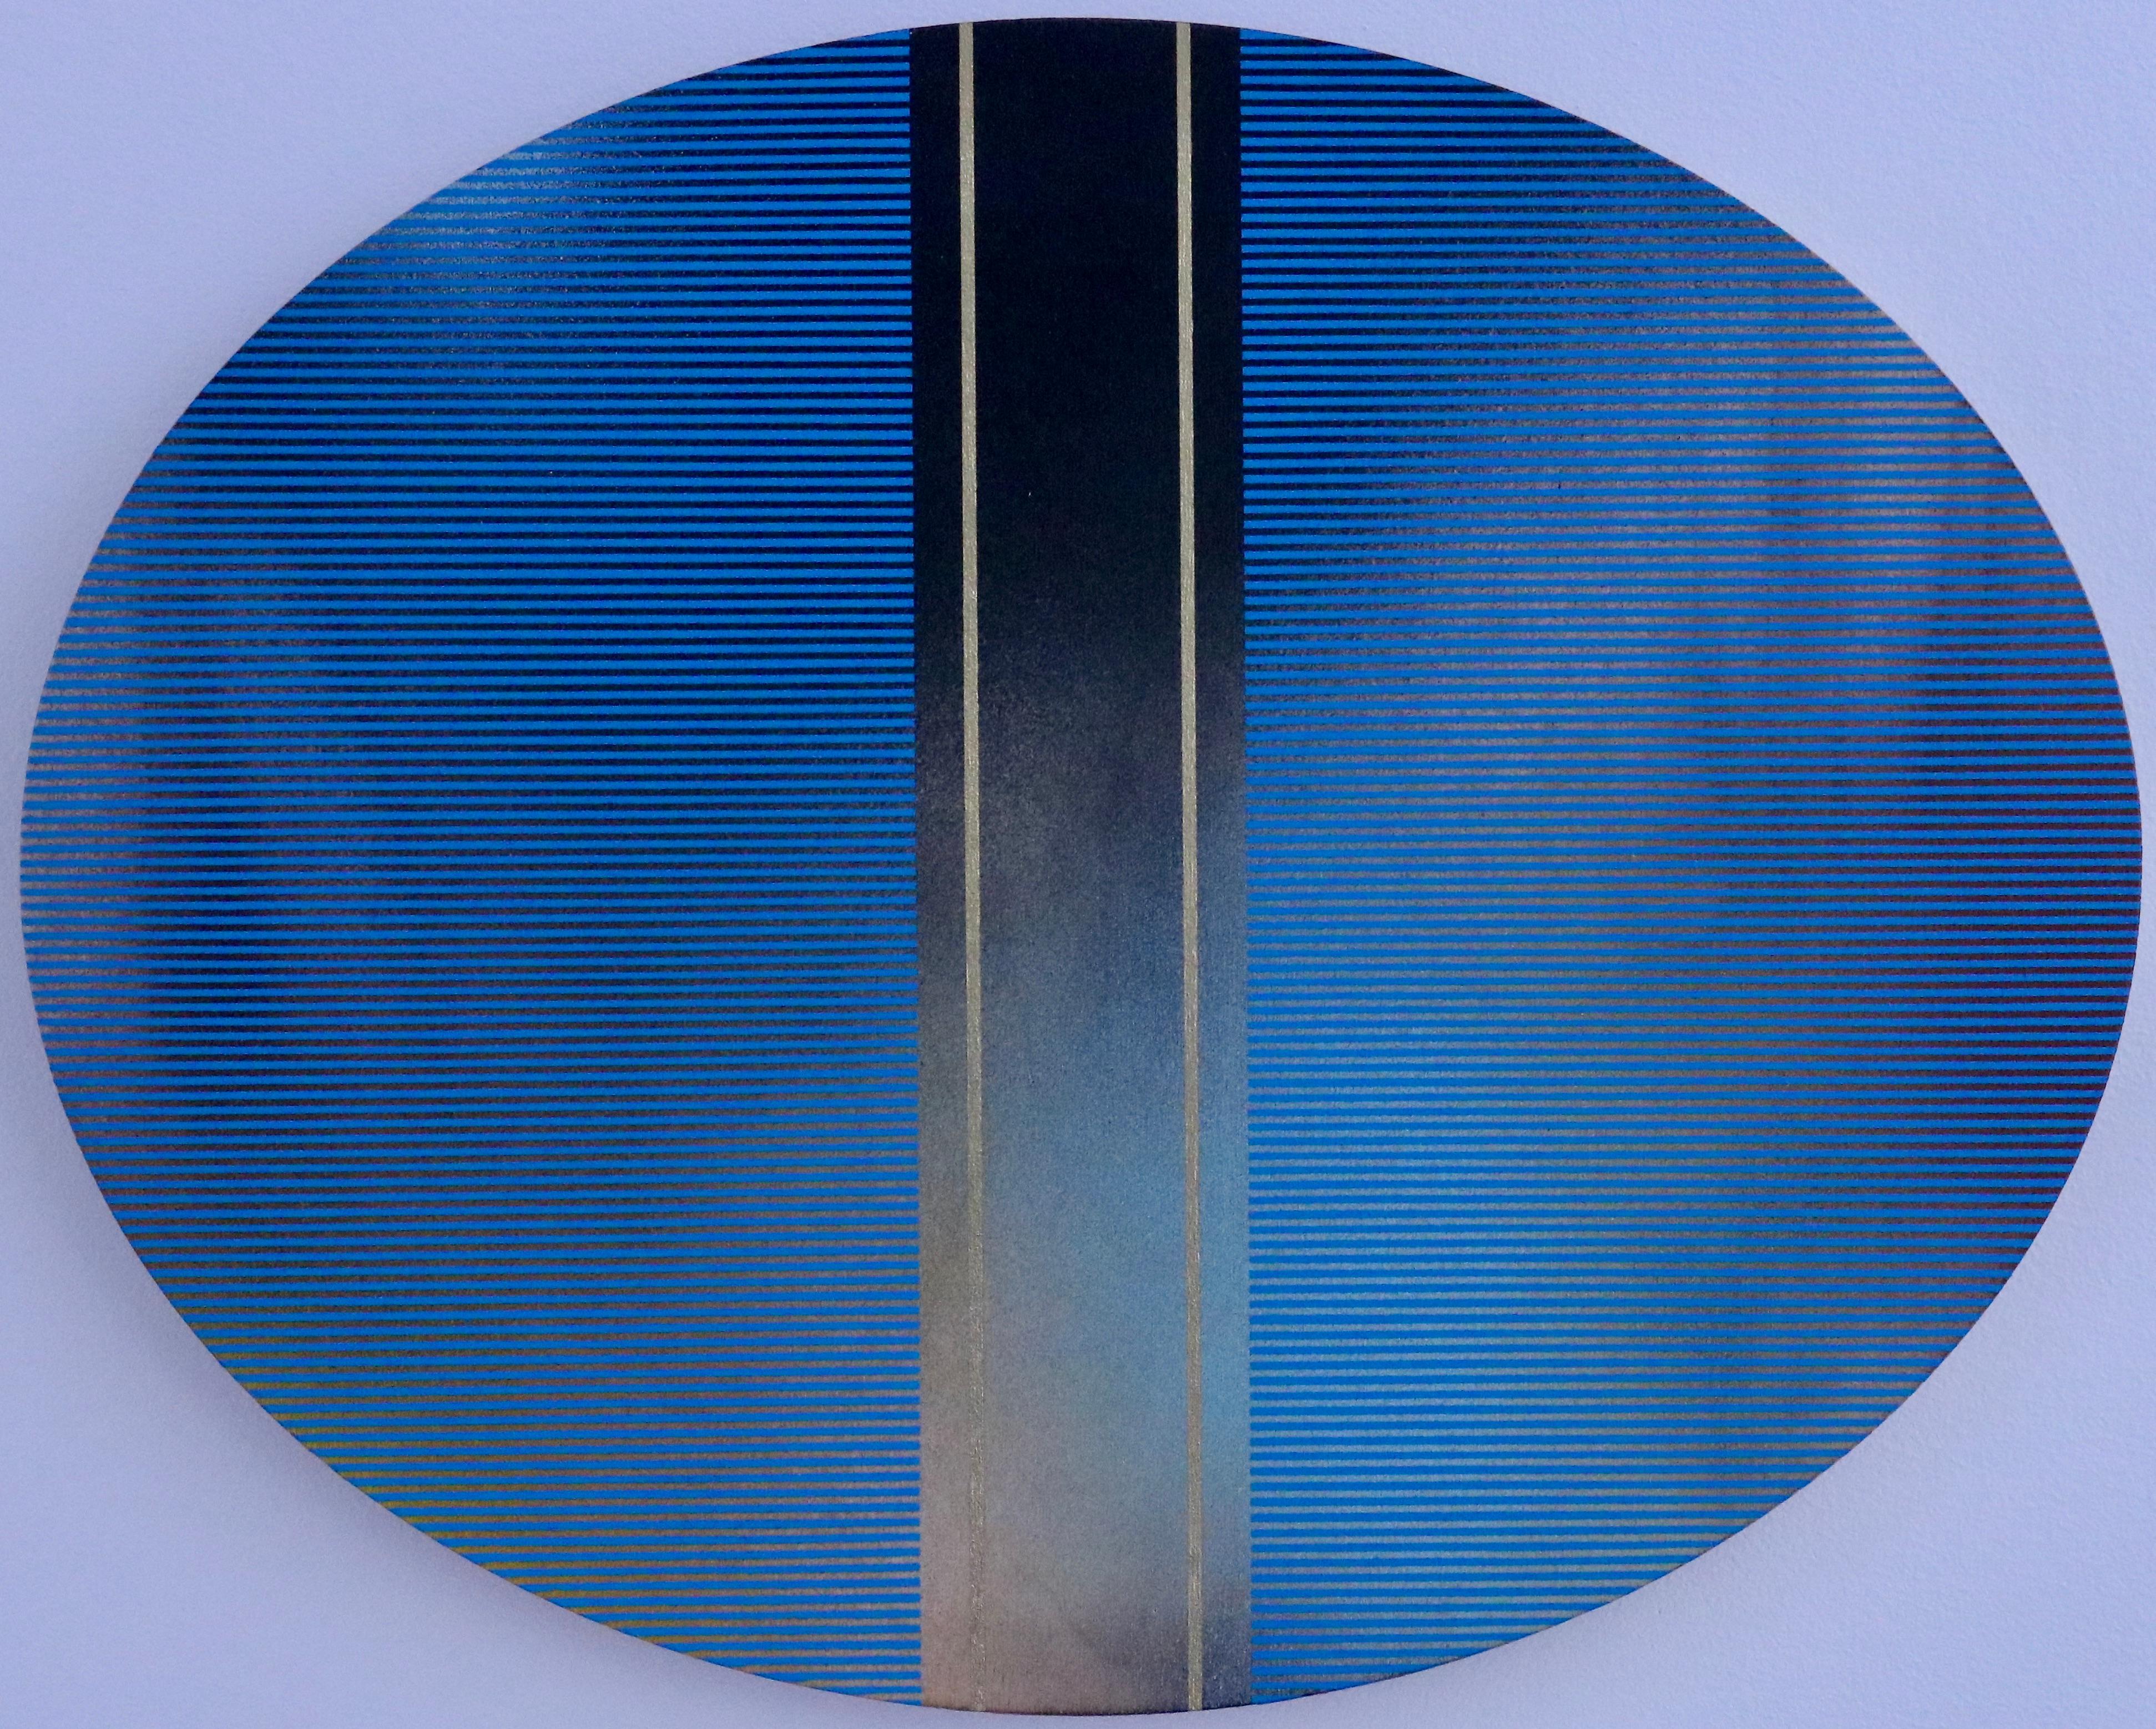 Melisa Taylor Metzger Abstract Painting - Mangata 49 Oval (classic blue grid painting abstract wood Art Deco op art)